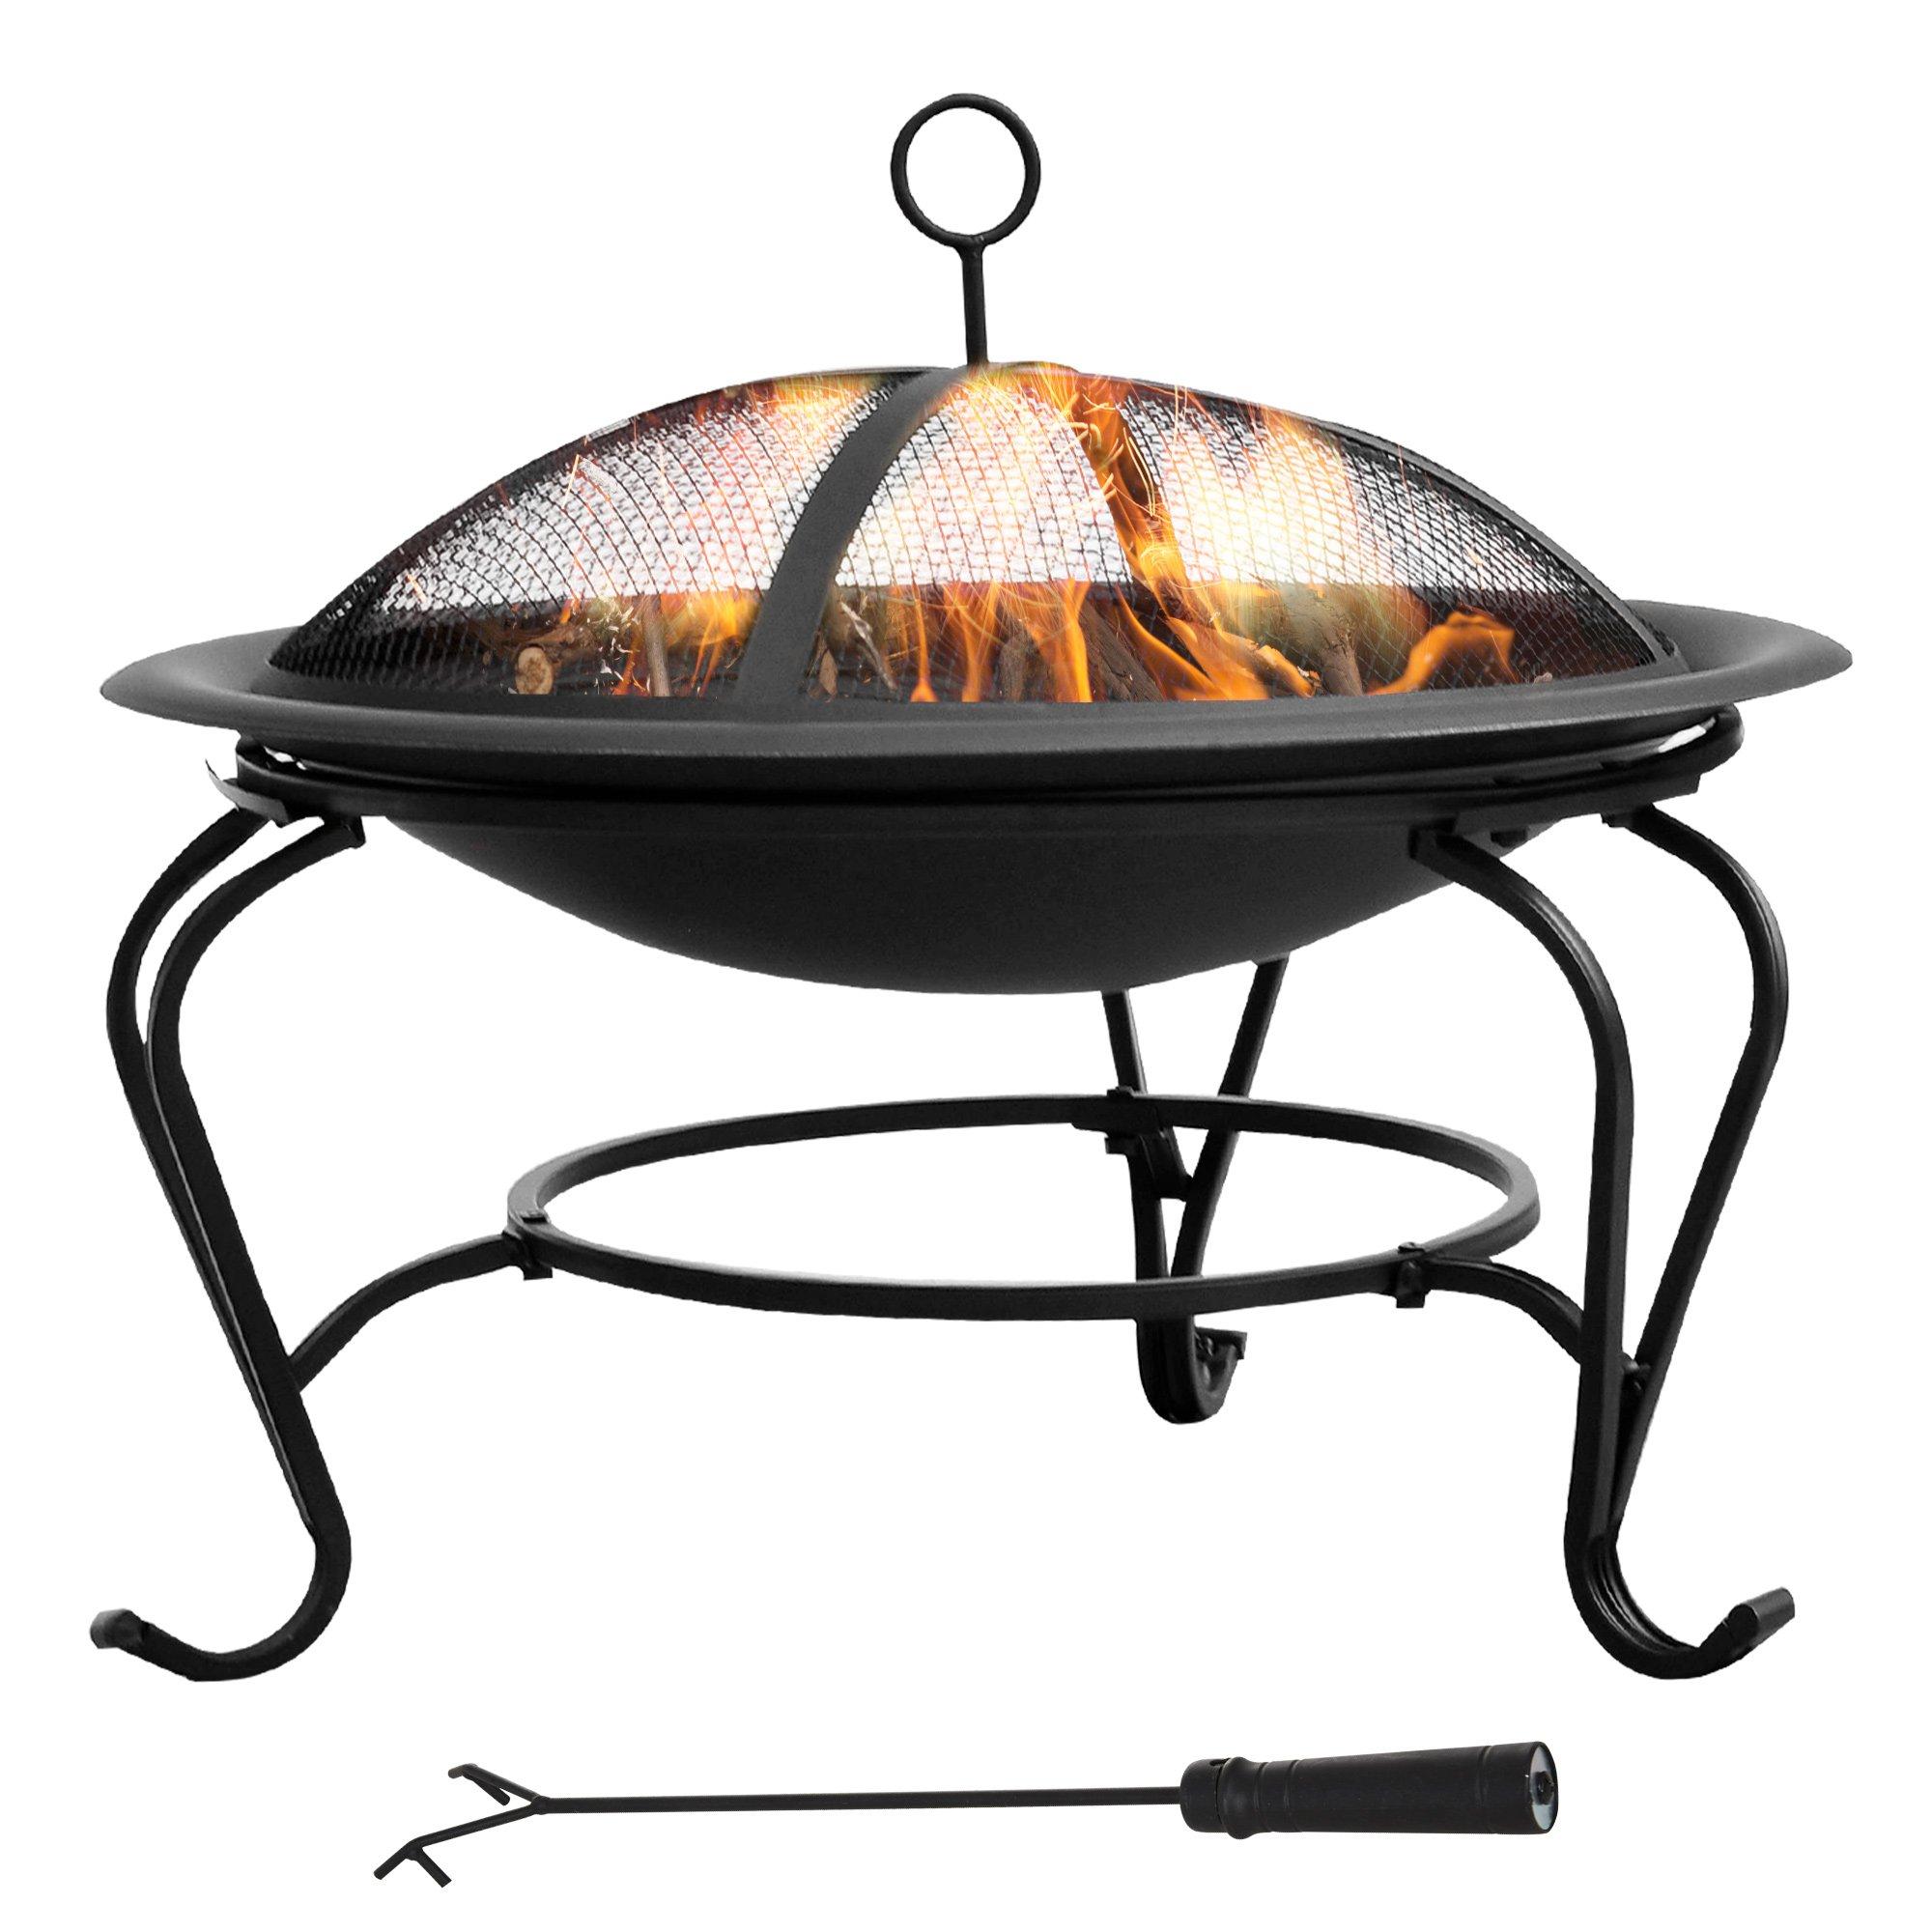 Outdoor Fire Pit Wood Log Burning Heater Garden Stove Patio Brazier